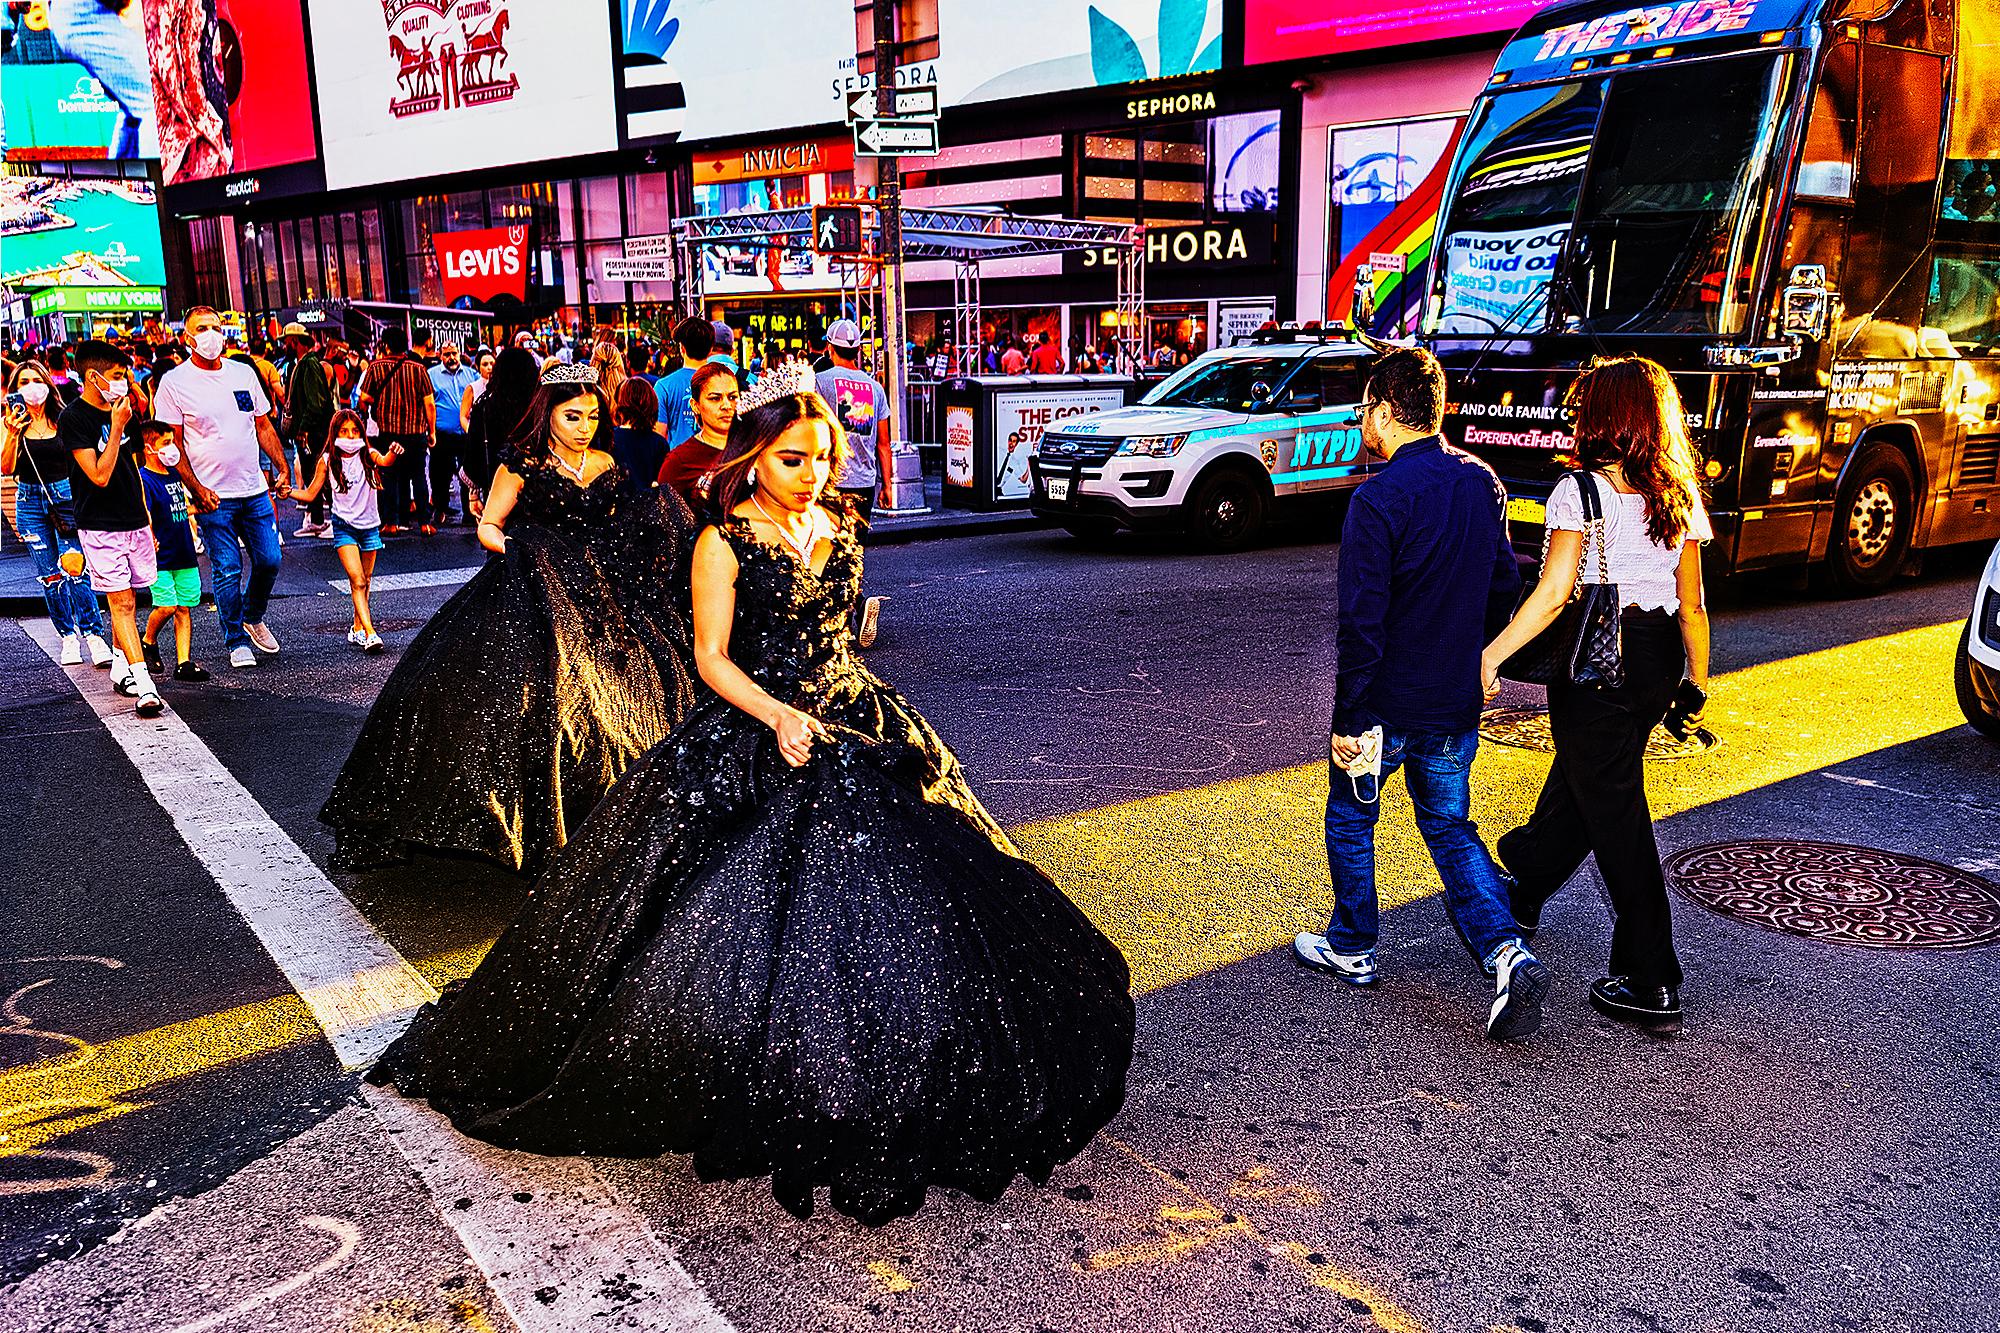 Mitchell Funk Abstract Photograph - Debutantes in Formal Black Evening Dress  with Tiara in Times Square